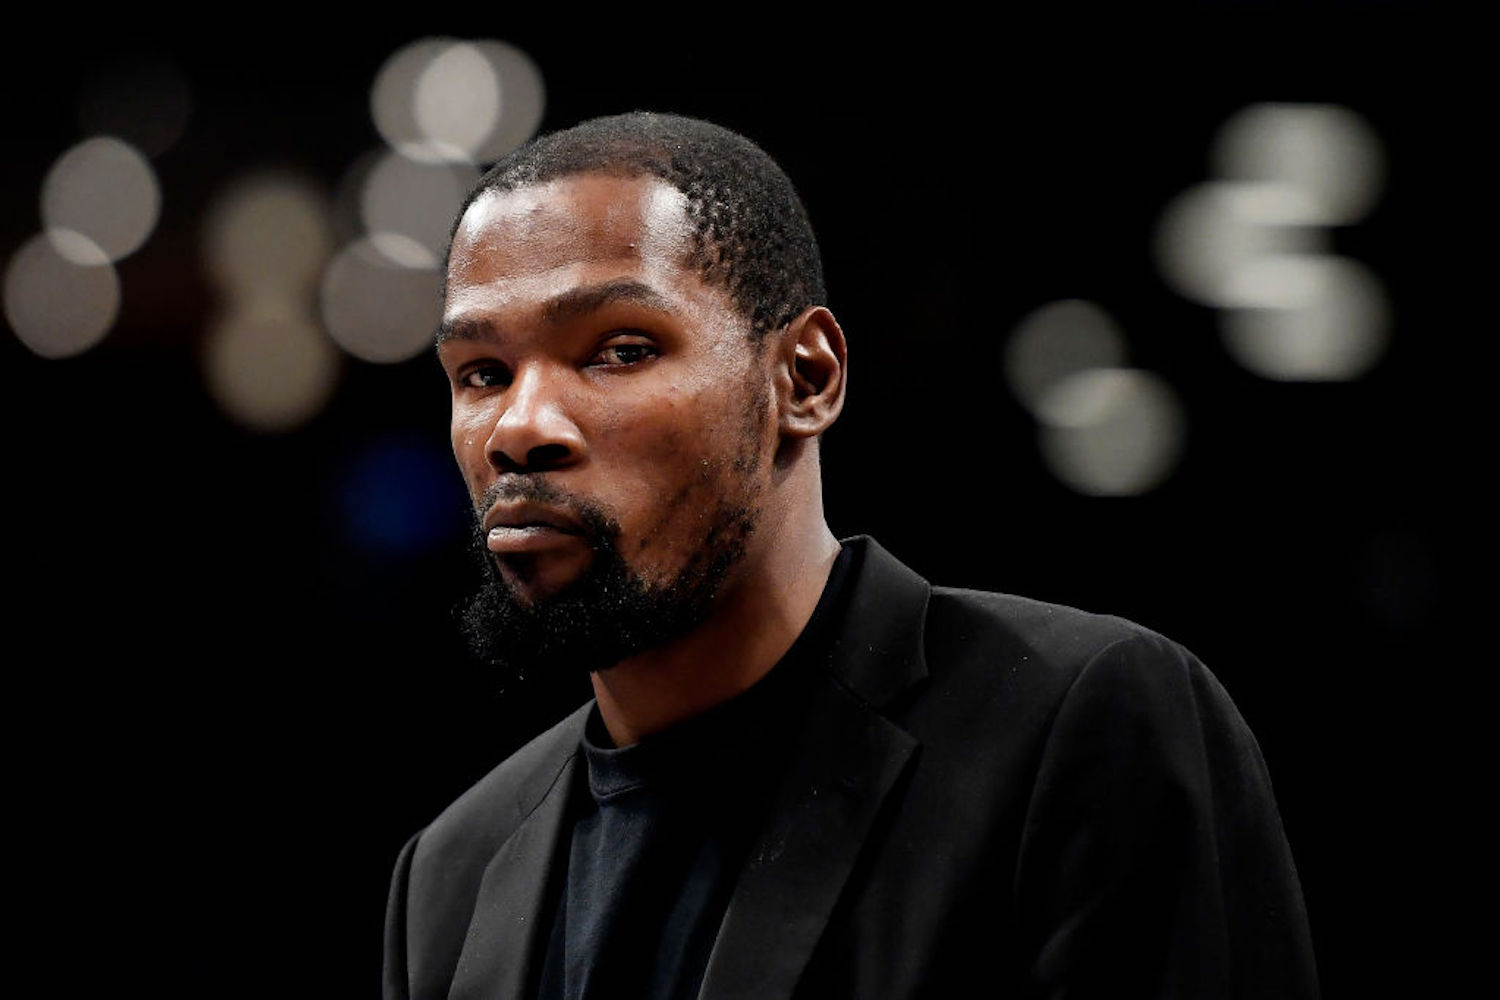 Kevin Durant was exposed for using burner accounts three years ago, but he's clearly not done anonymously defending himself online.